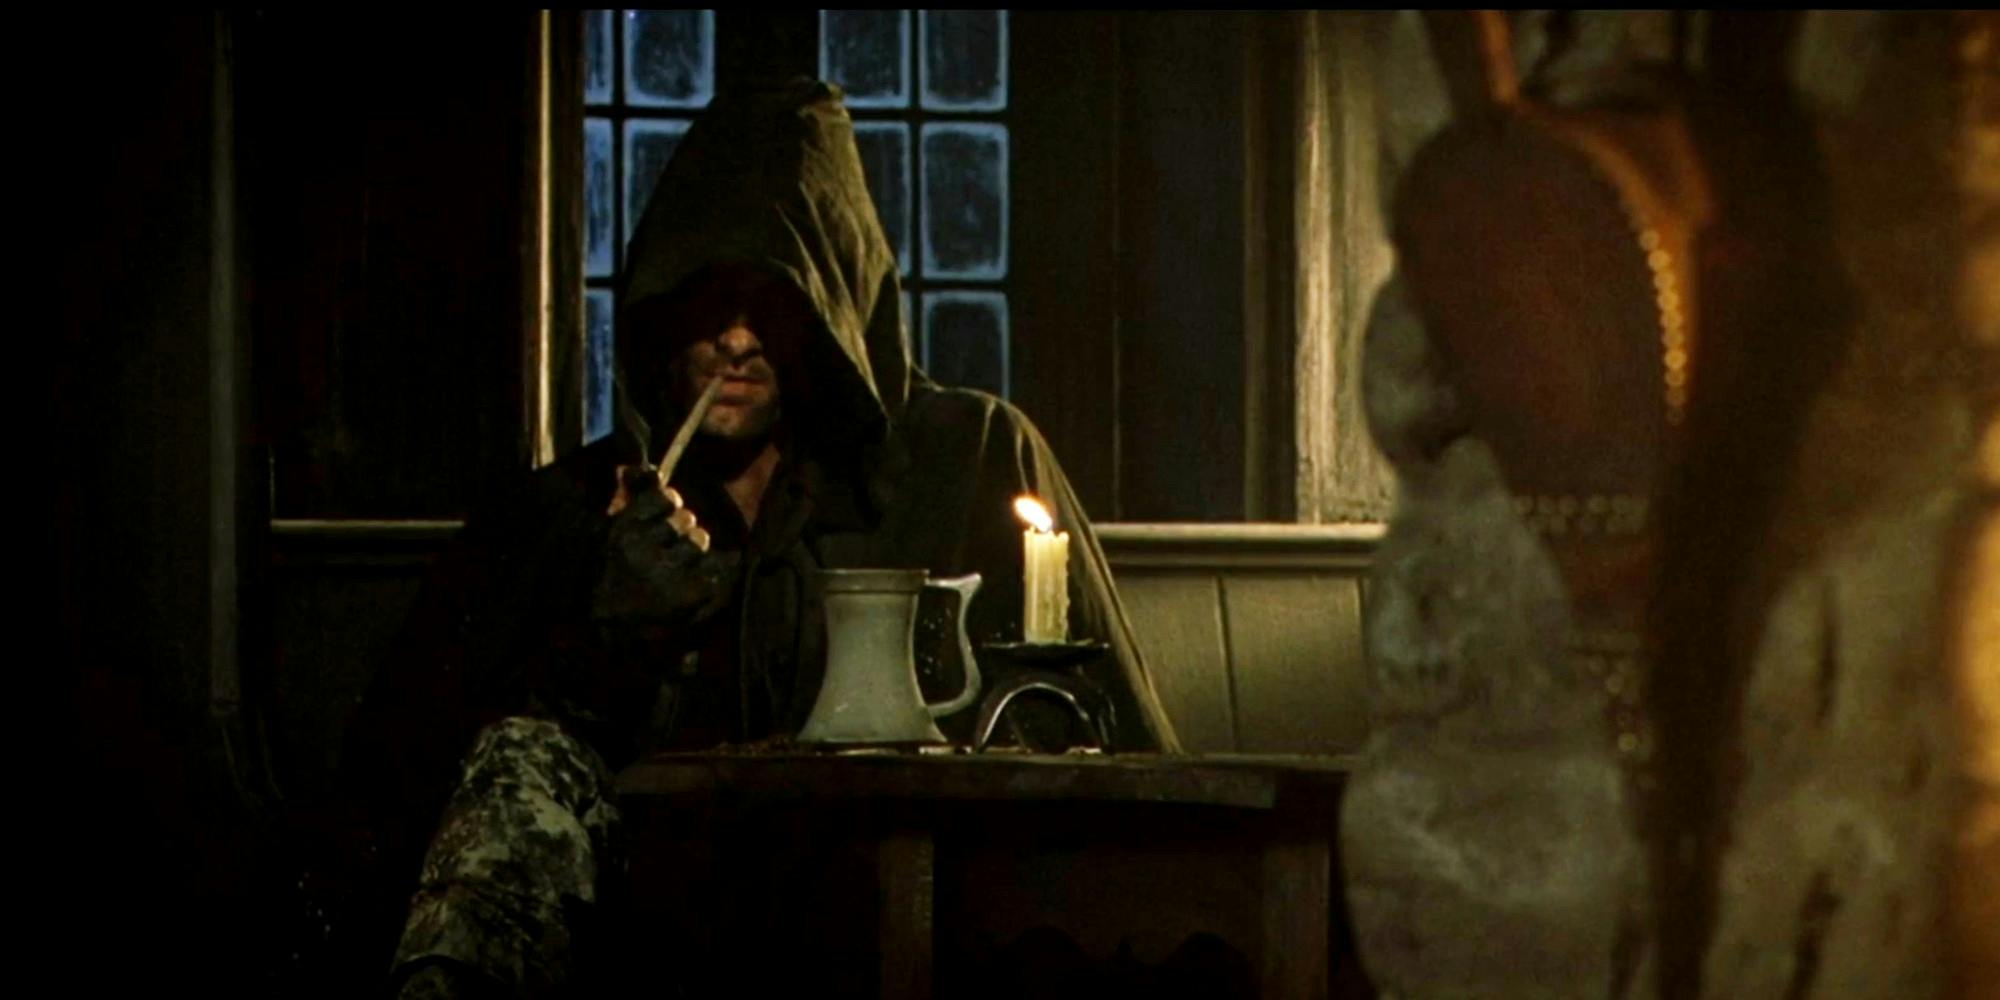 an image from lord of the rings showing aragorn (Viggo Mortensen) in the bar.